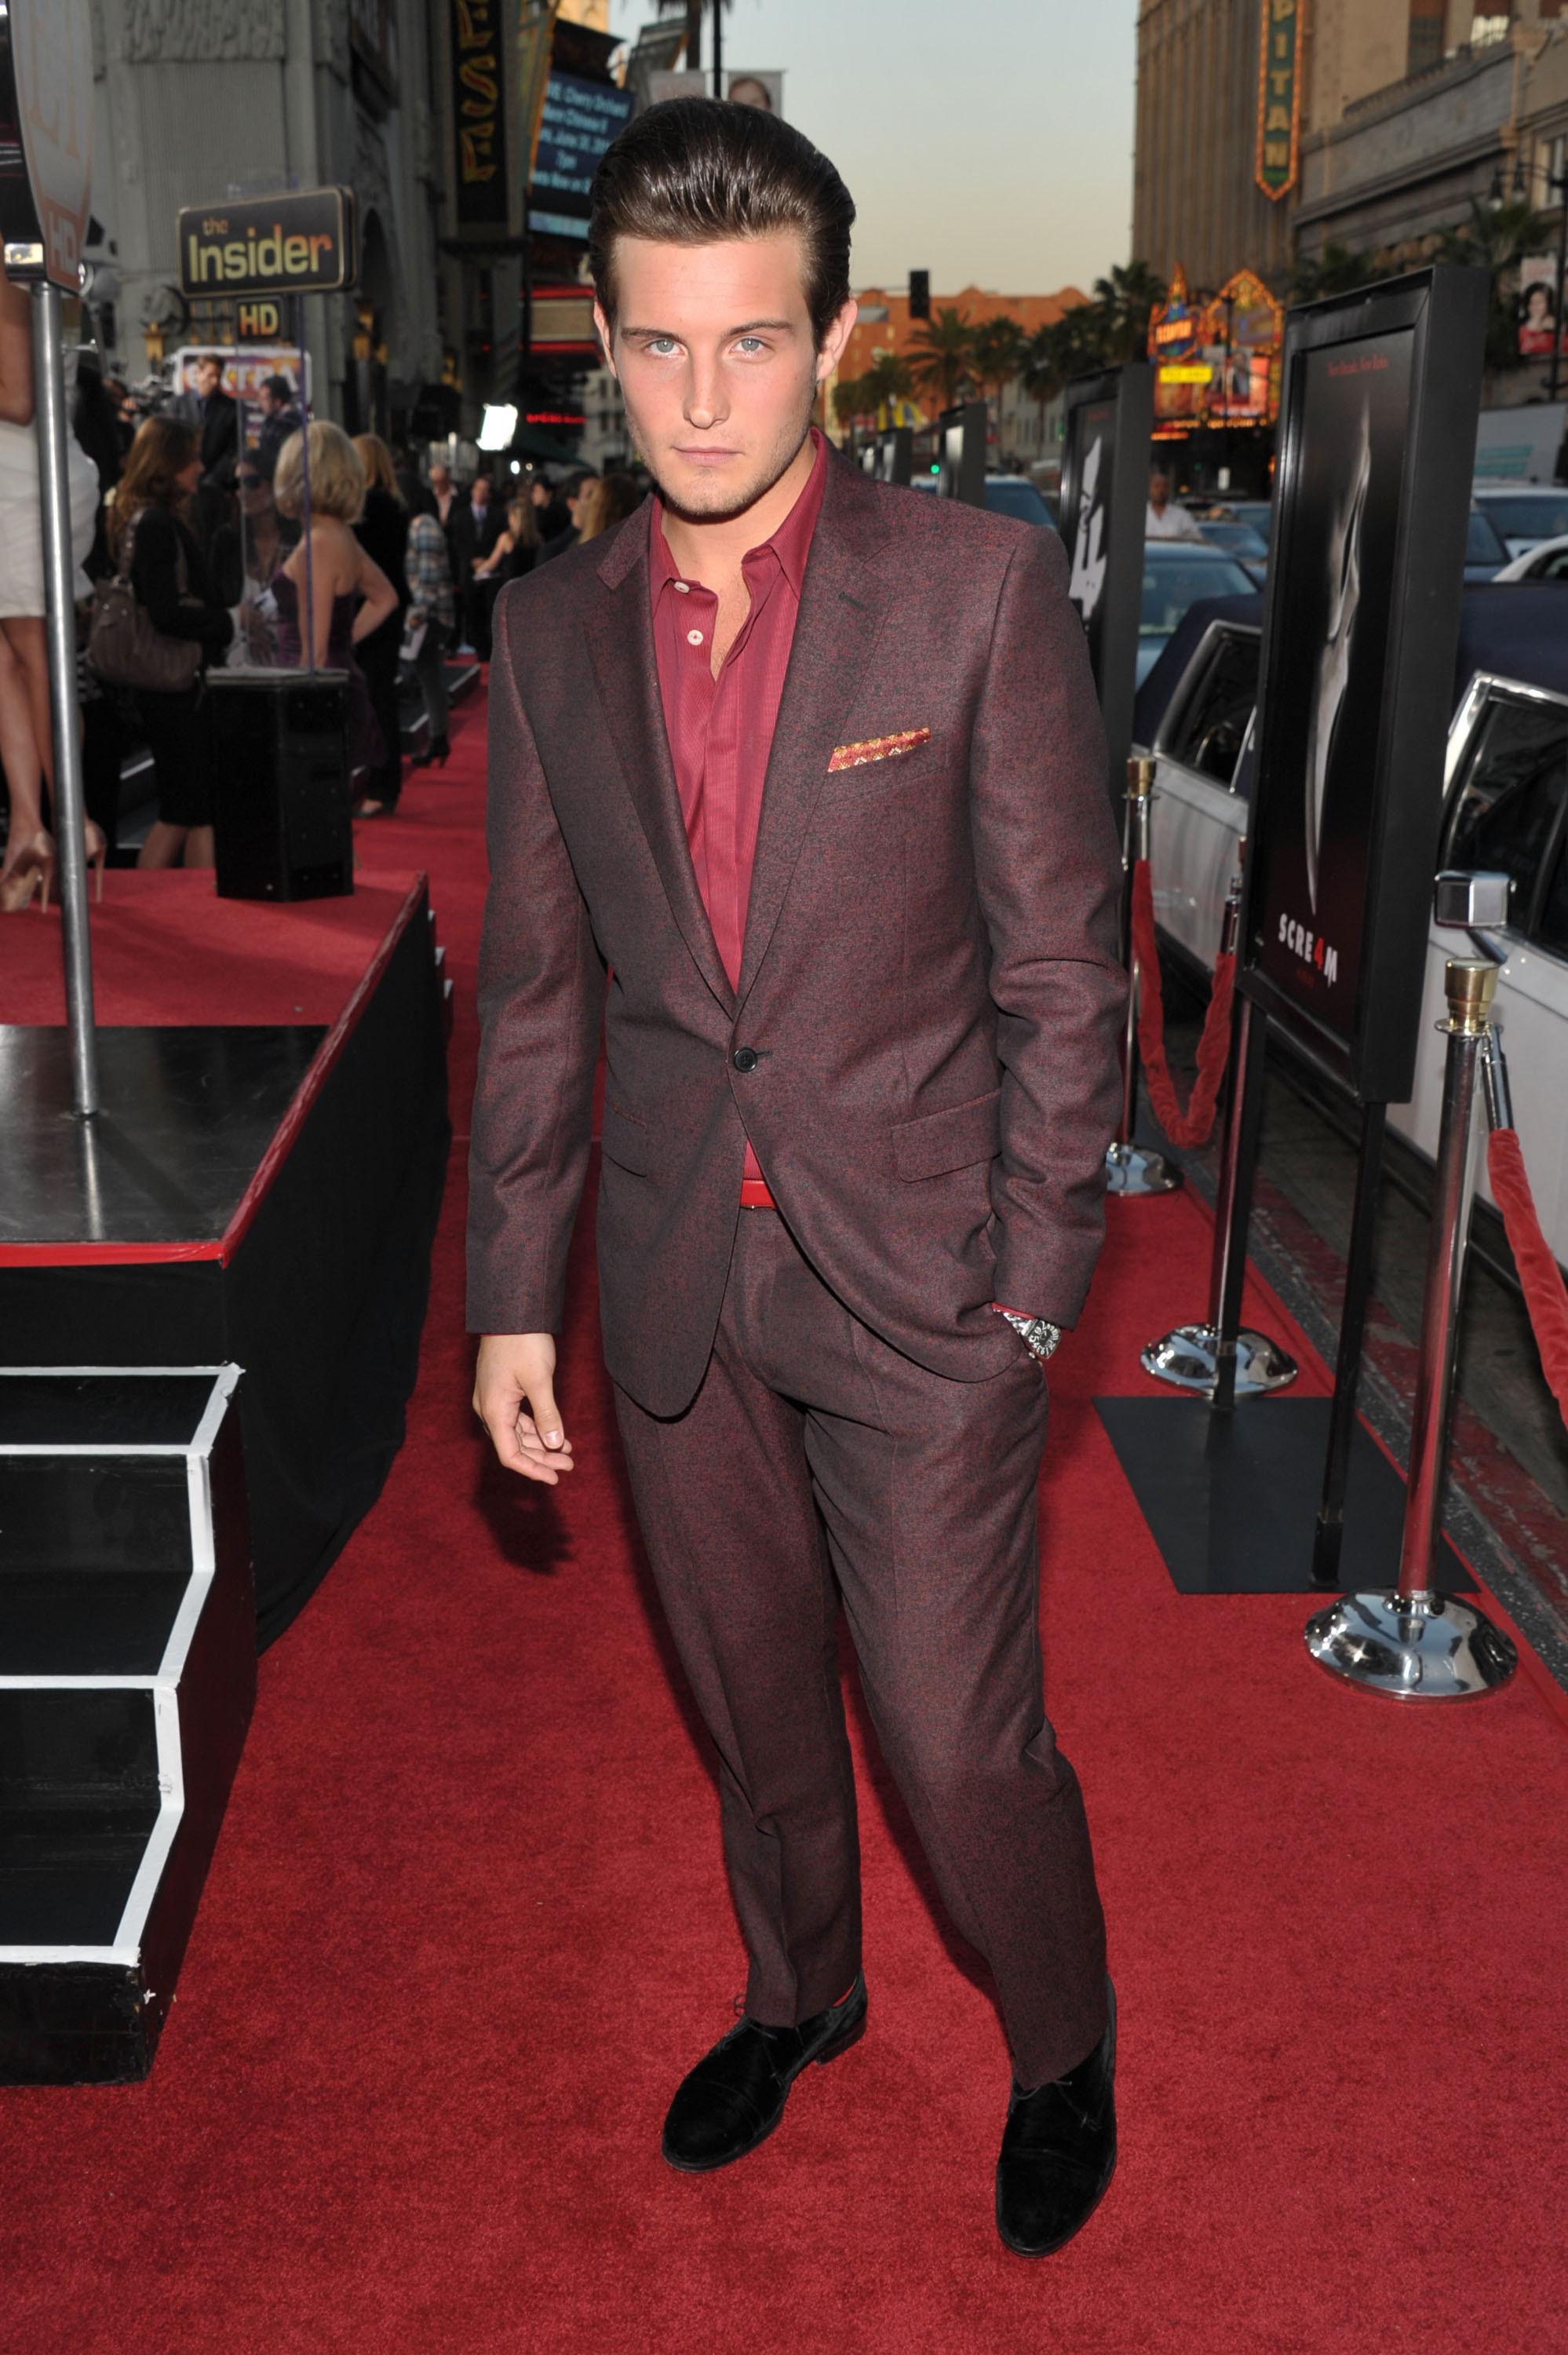 Nico Tortorella in a maroon suit with a red collared shirt